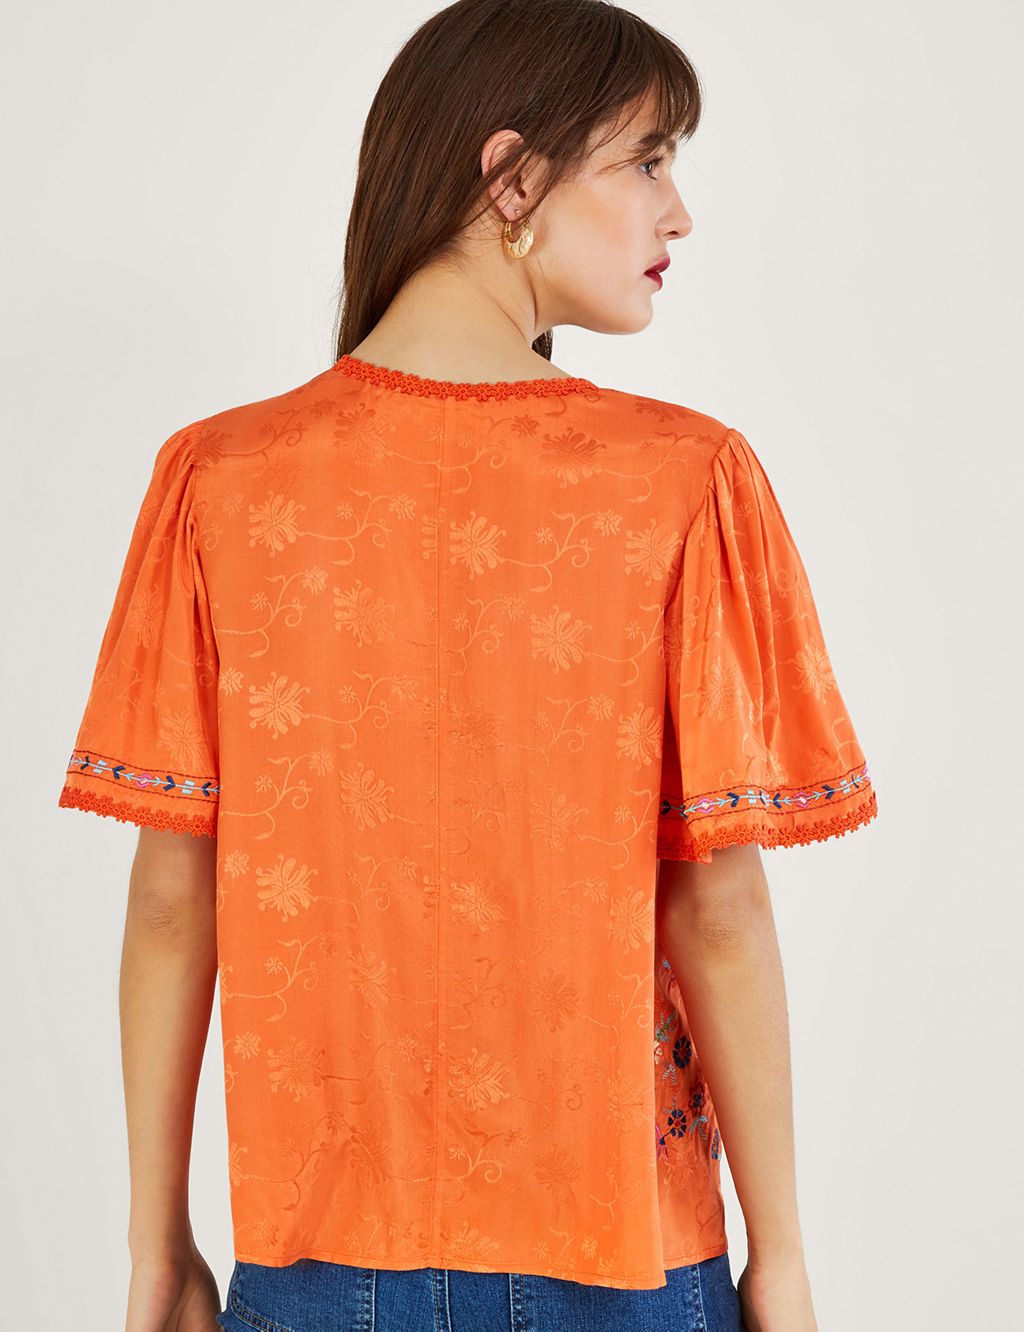 Embroidered Floral Round Neck Blouse image 4